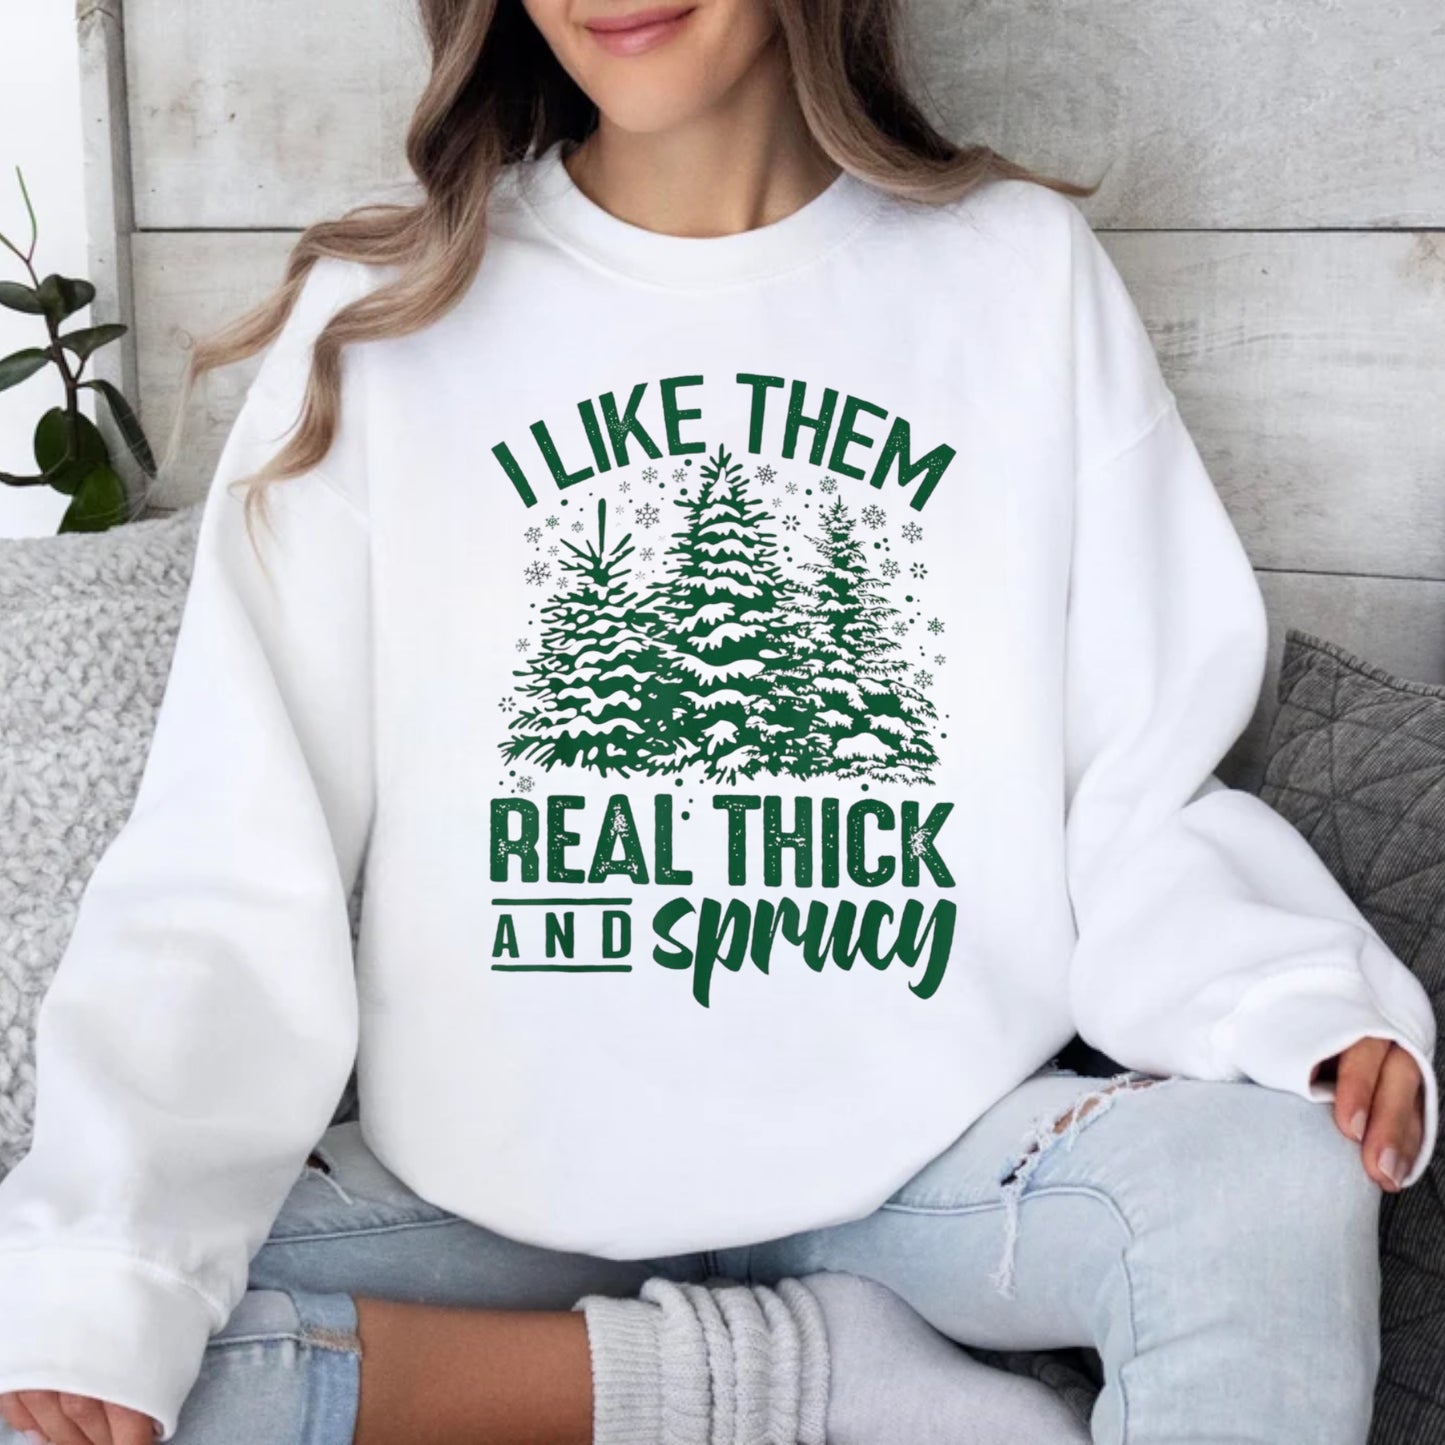 Thick and Sprucy-Tee or Crewneck Sweatshirt